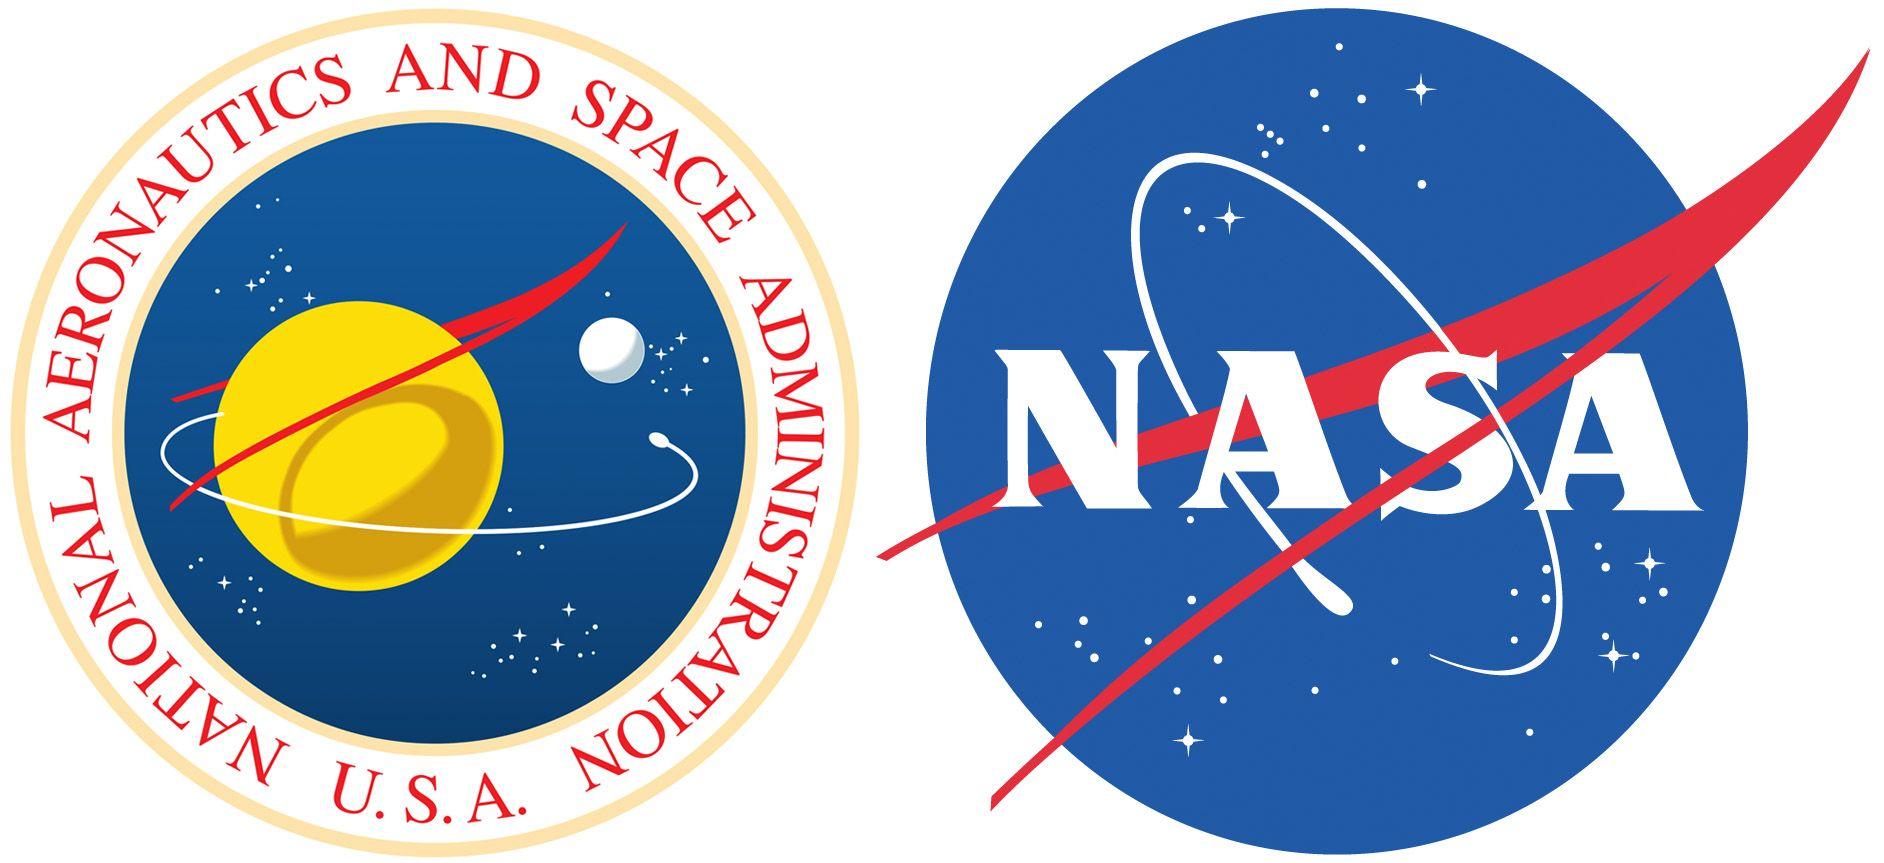 NASA Serpent Logo - What's The Red Shape In NASA's Meatball Logo?